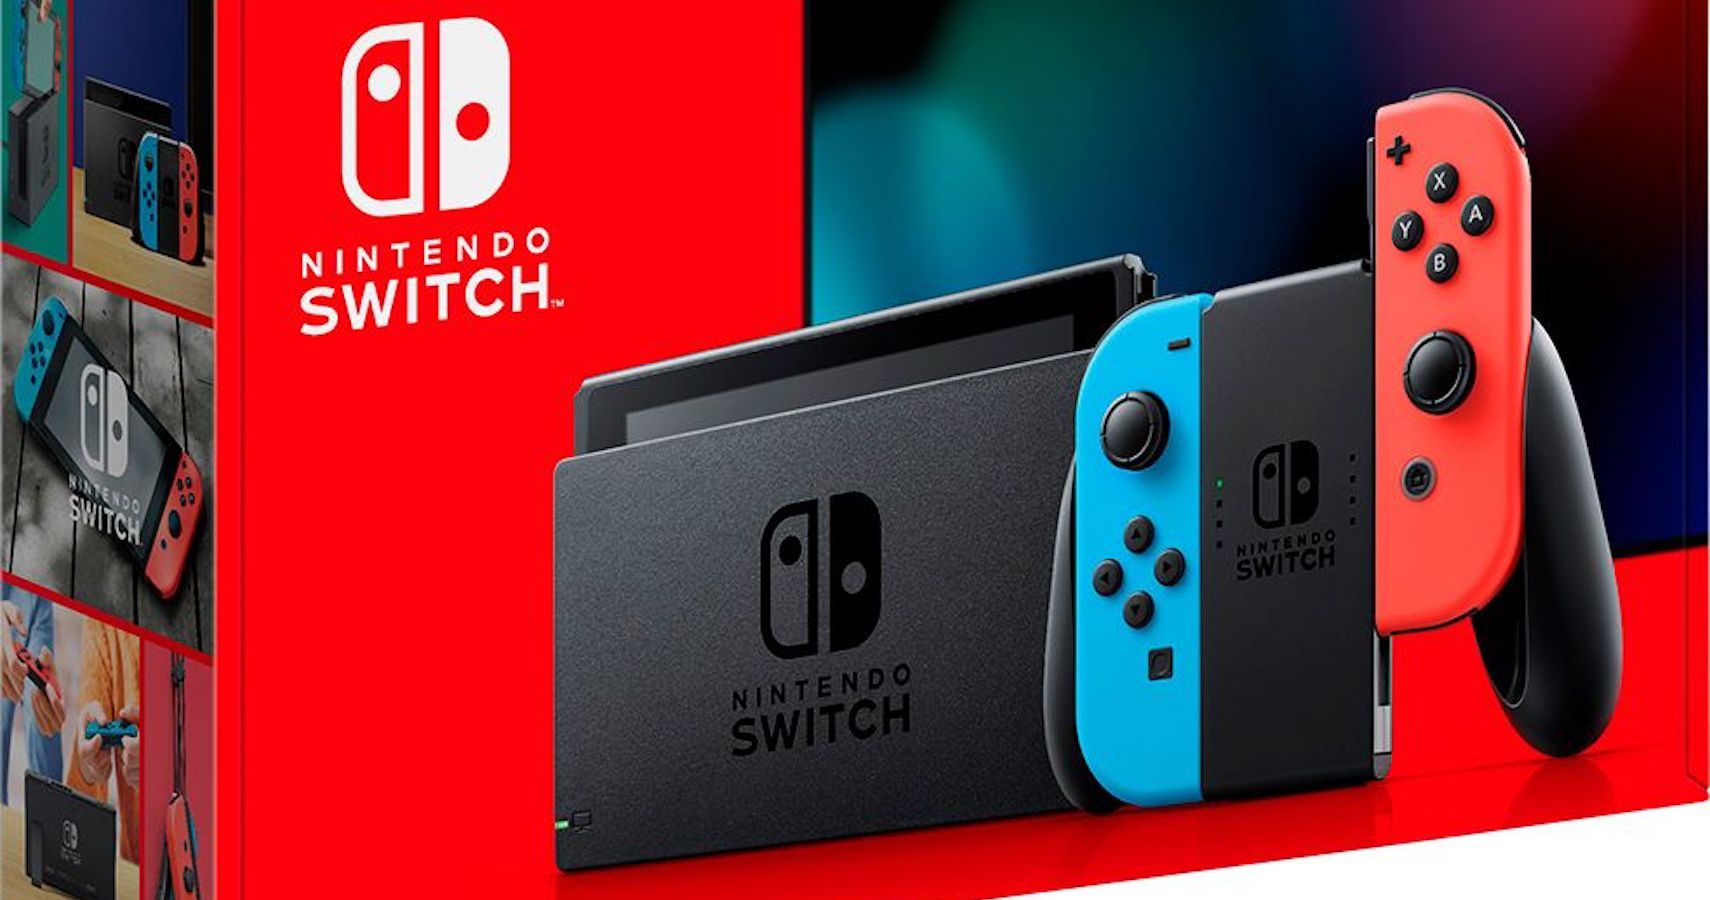 Nintendo switch console with box